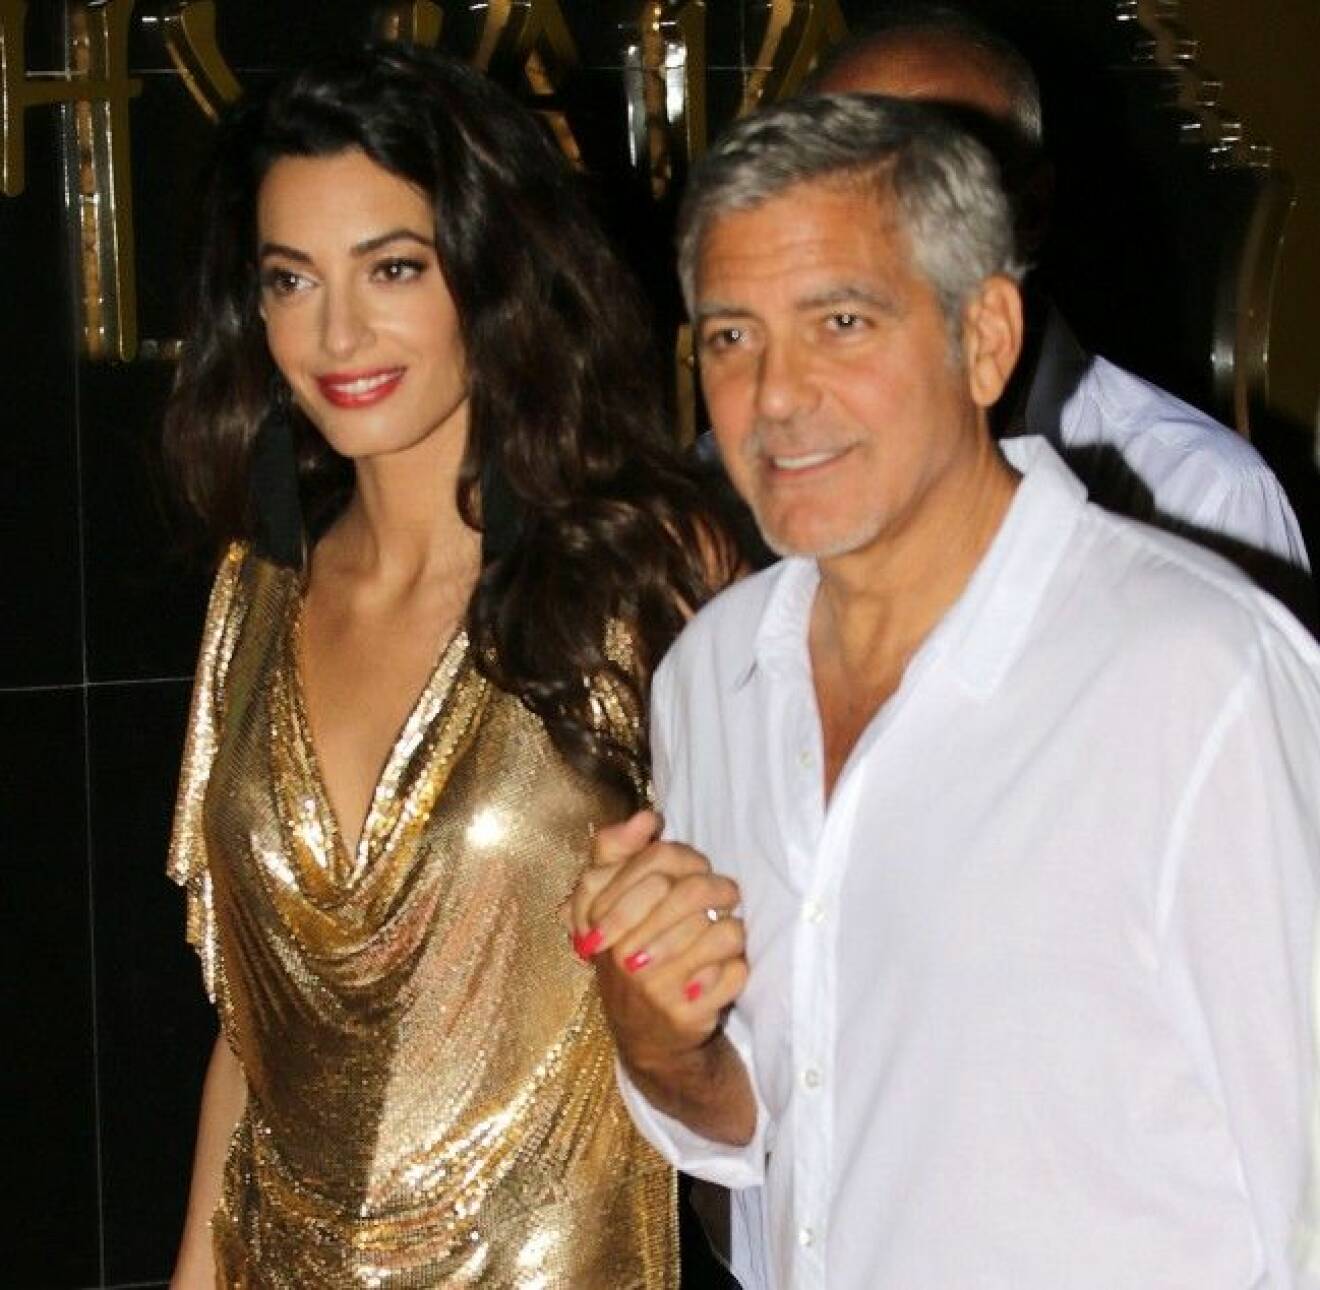 Amal Clooney and George Clooney WEARING VIONNET